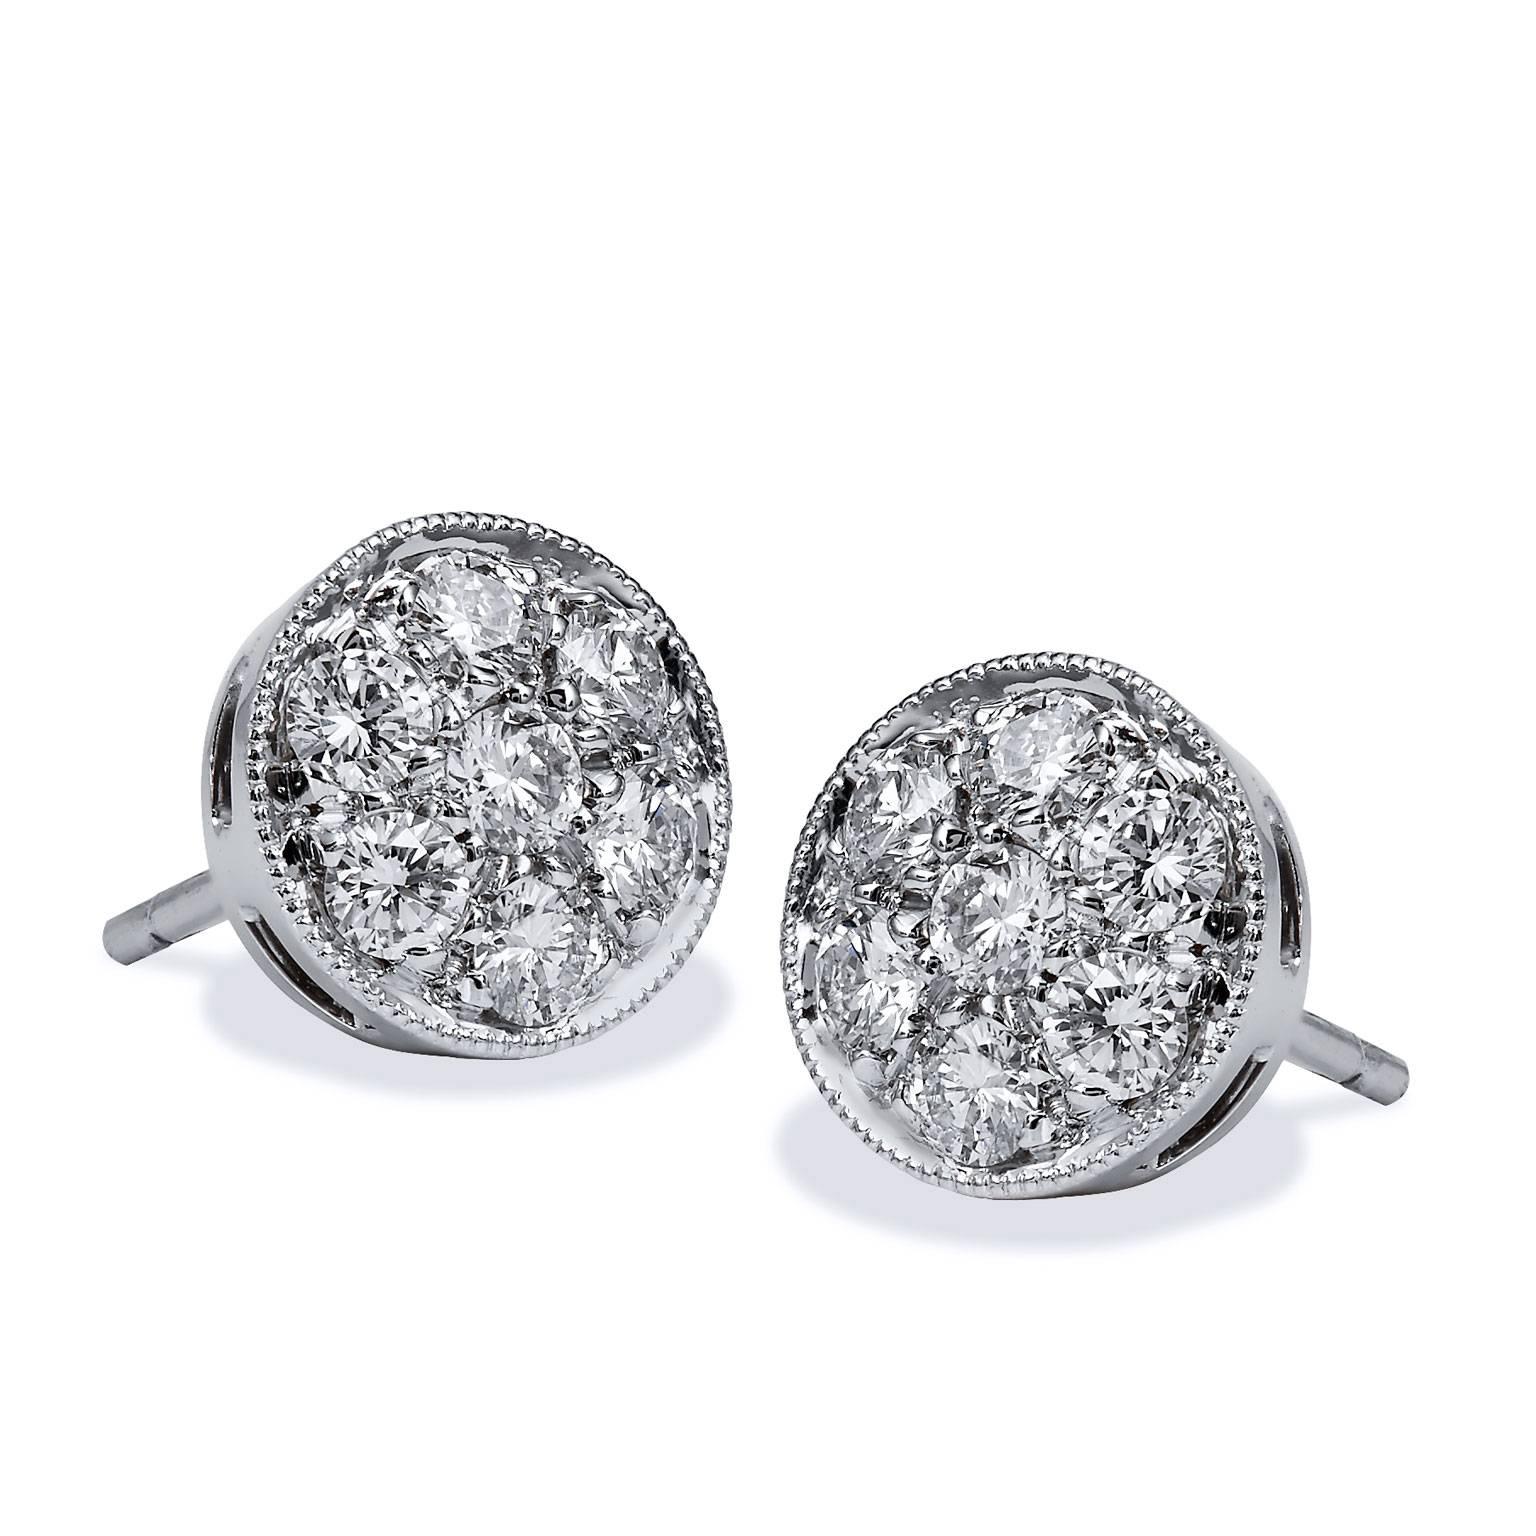 The Perfect button Earring- They will take you from home to office to evening
Eight Millimeter in Diameter, manufactured in eighteen karat white gold with fourteen round brilliant cut diamonds which are pave set
with a beaded edge. 
The Diamonds